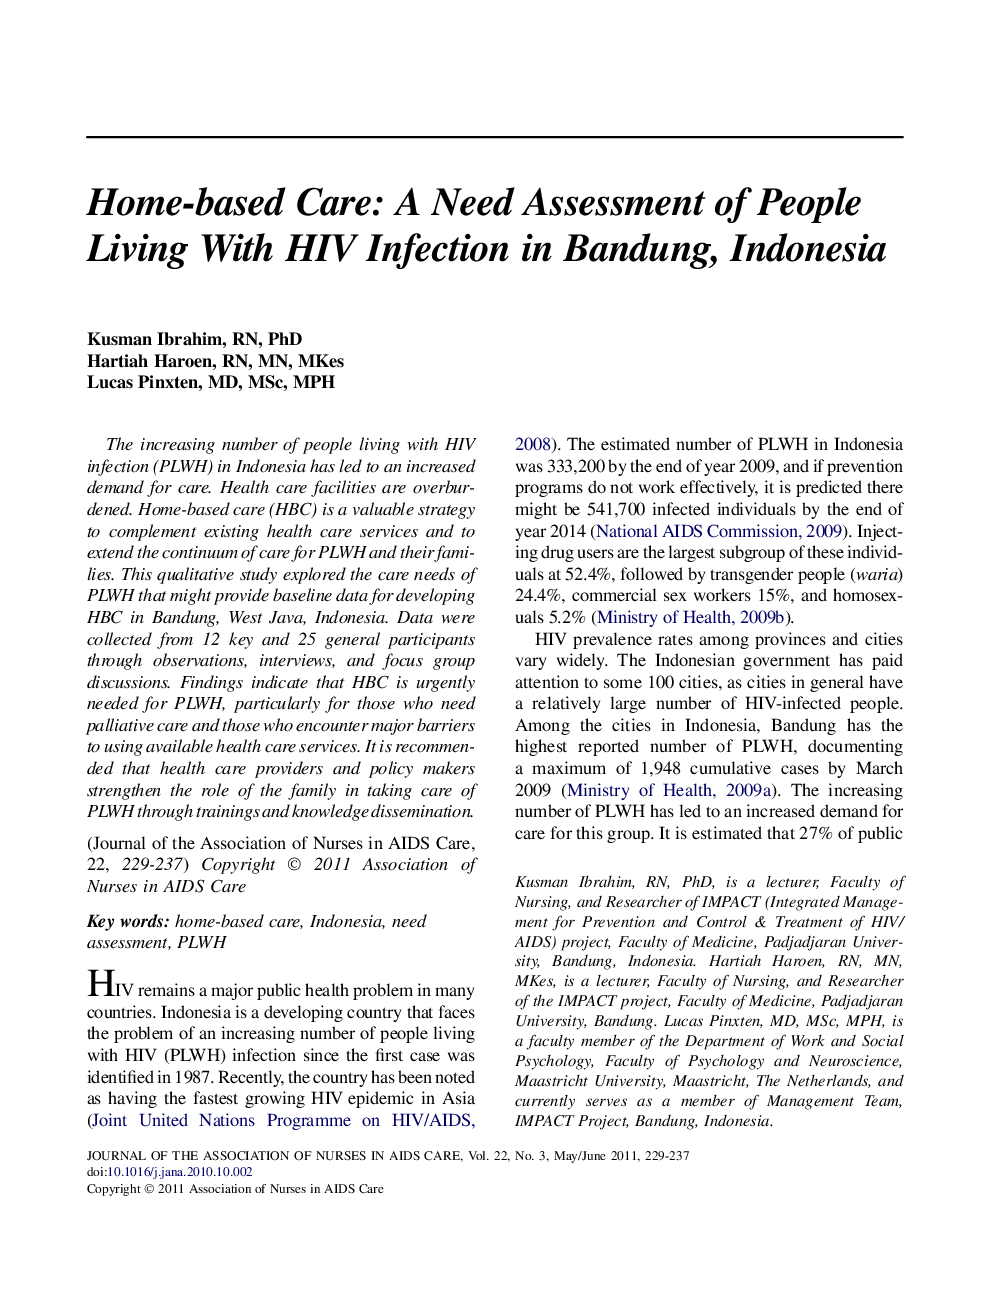 Home-based Care: A Need Assessment of People Living With HIV Infection in Bandung, Indonesia